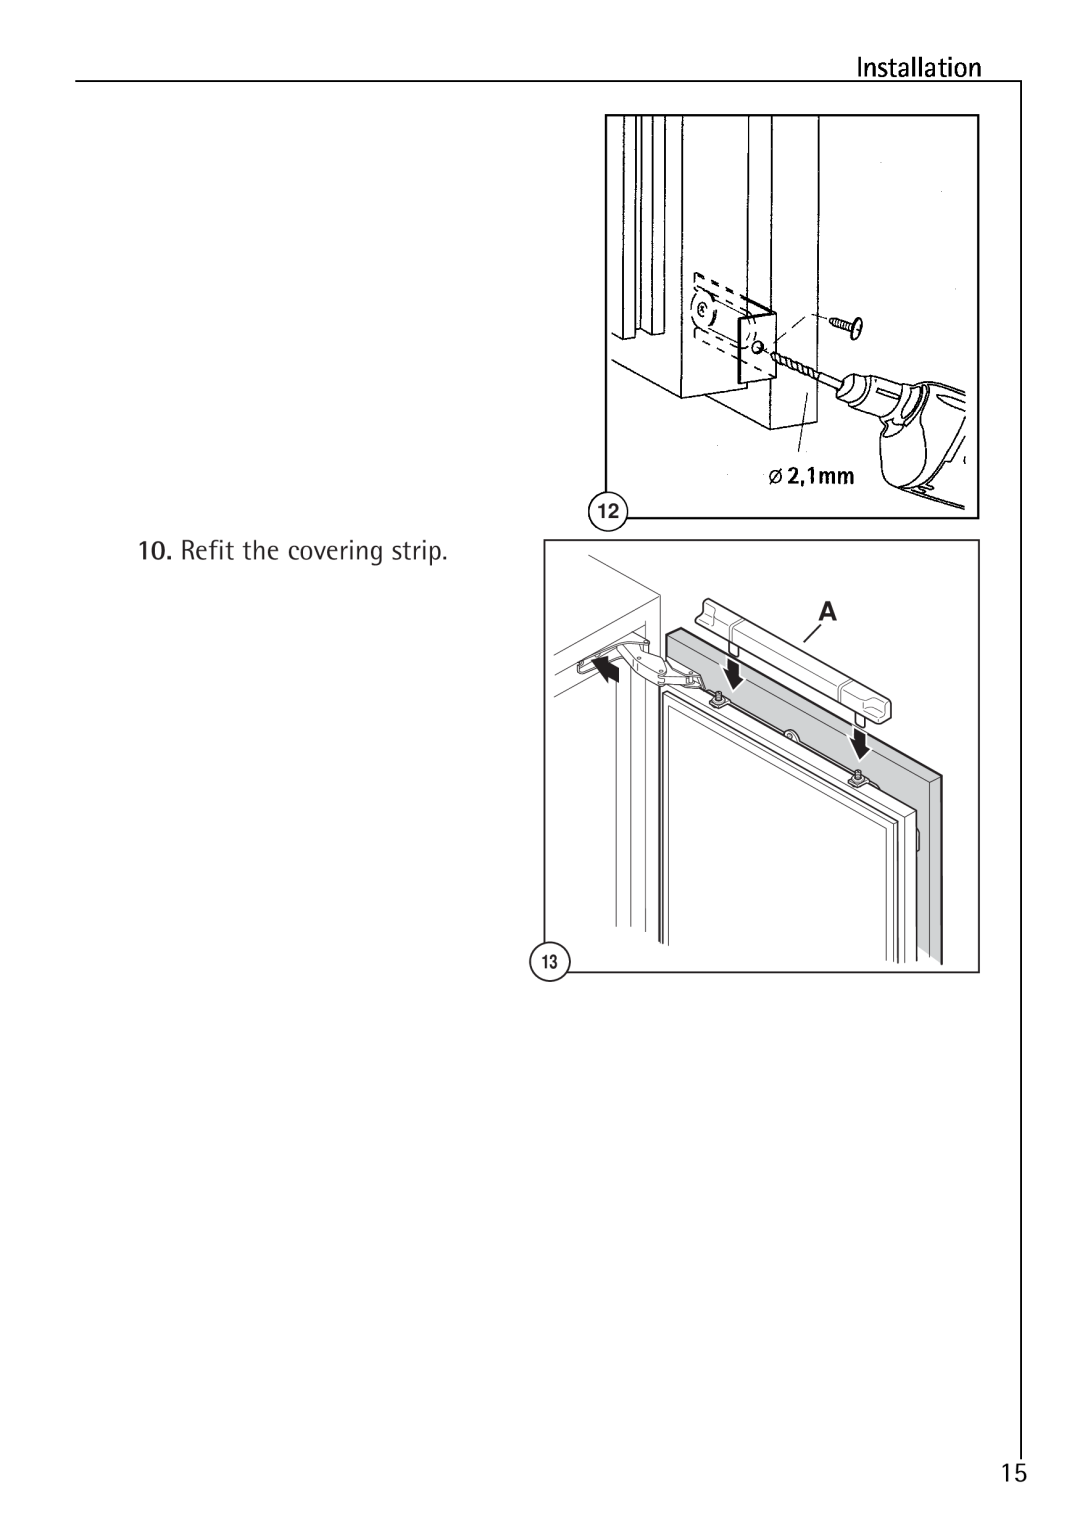 Electrolux 86000 i installation instructions Refit the covering strip 